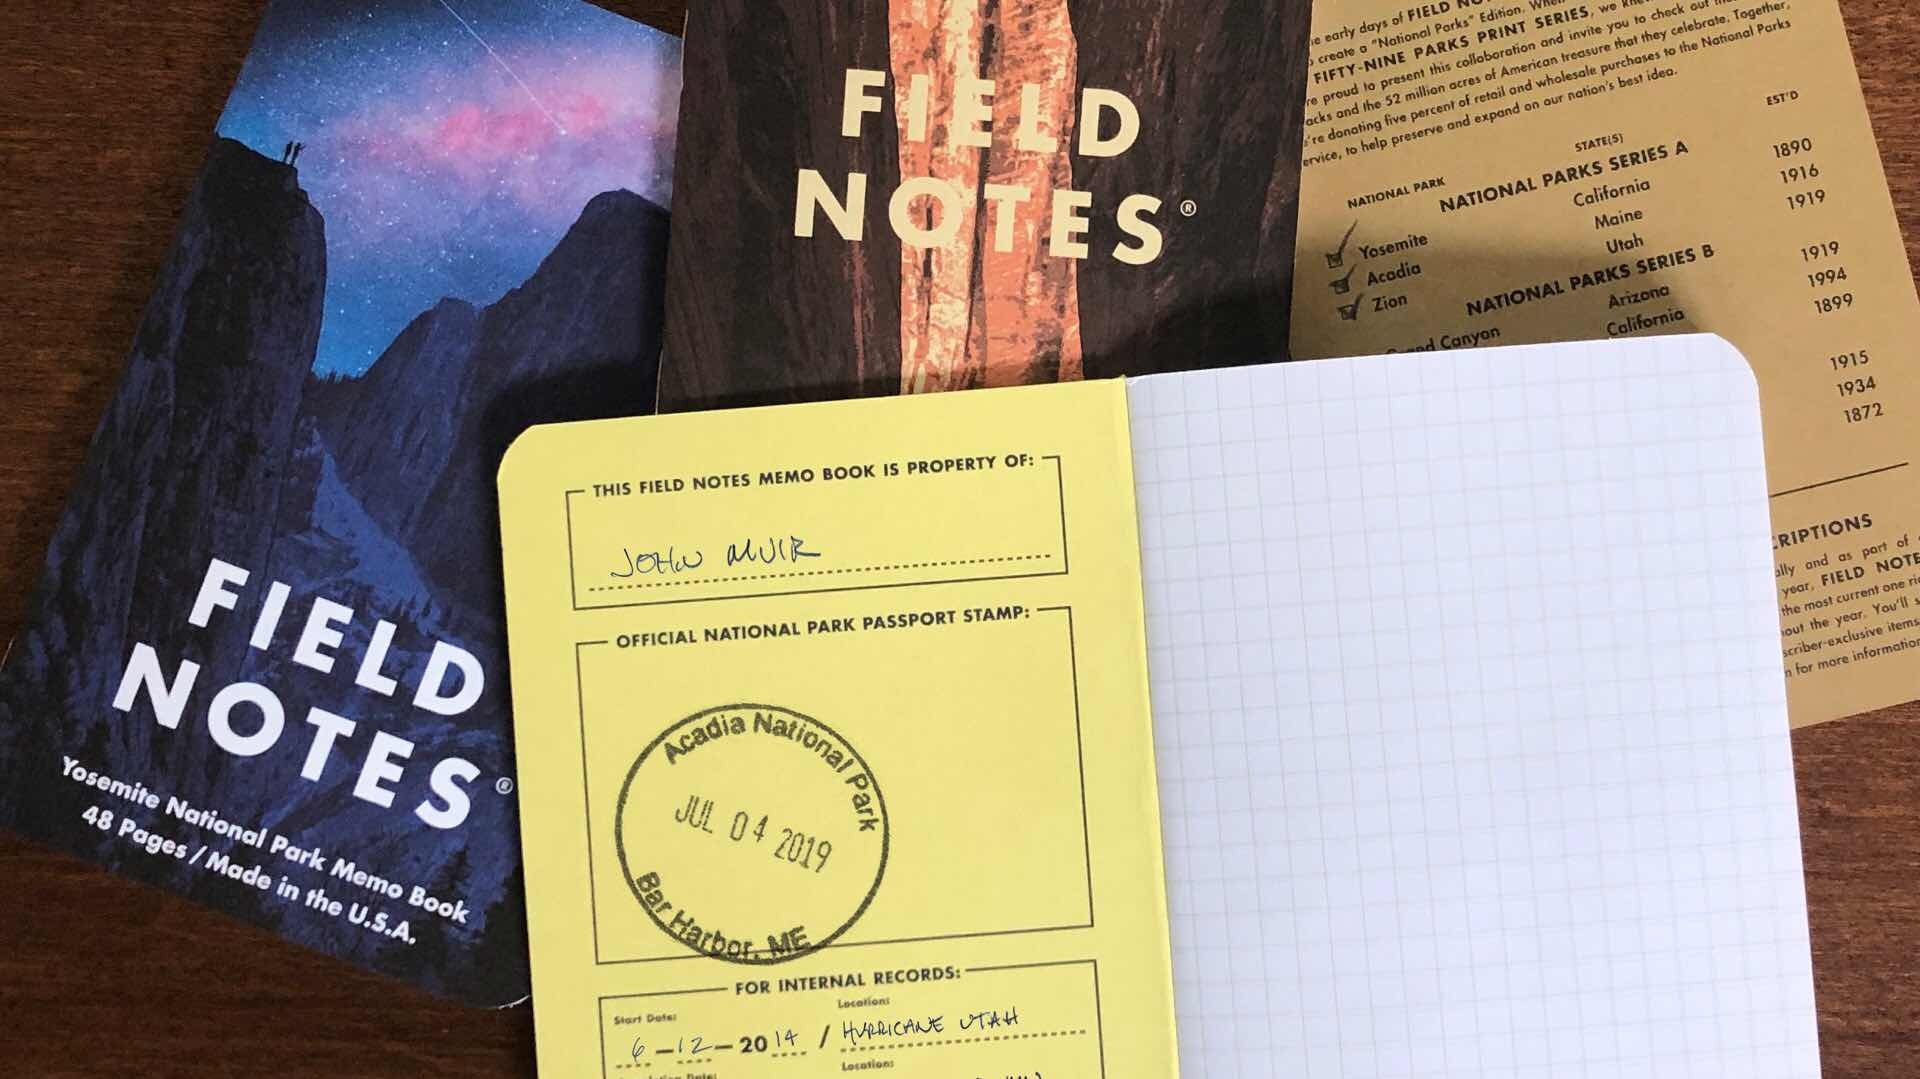 field-notes-national-parks-series-edition-2